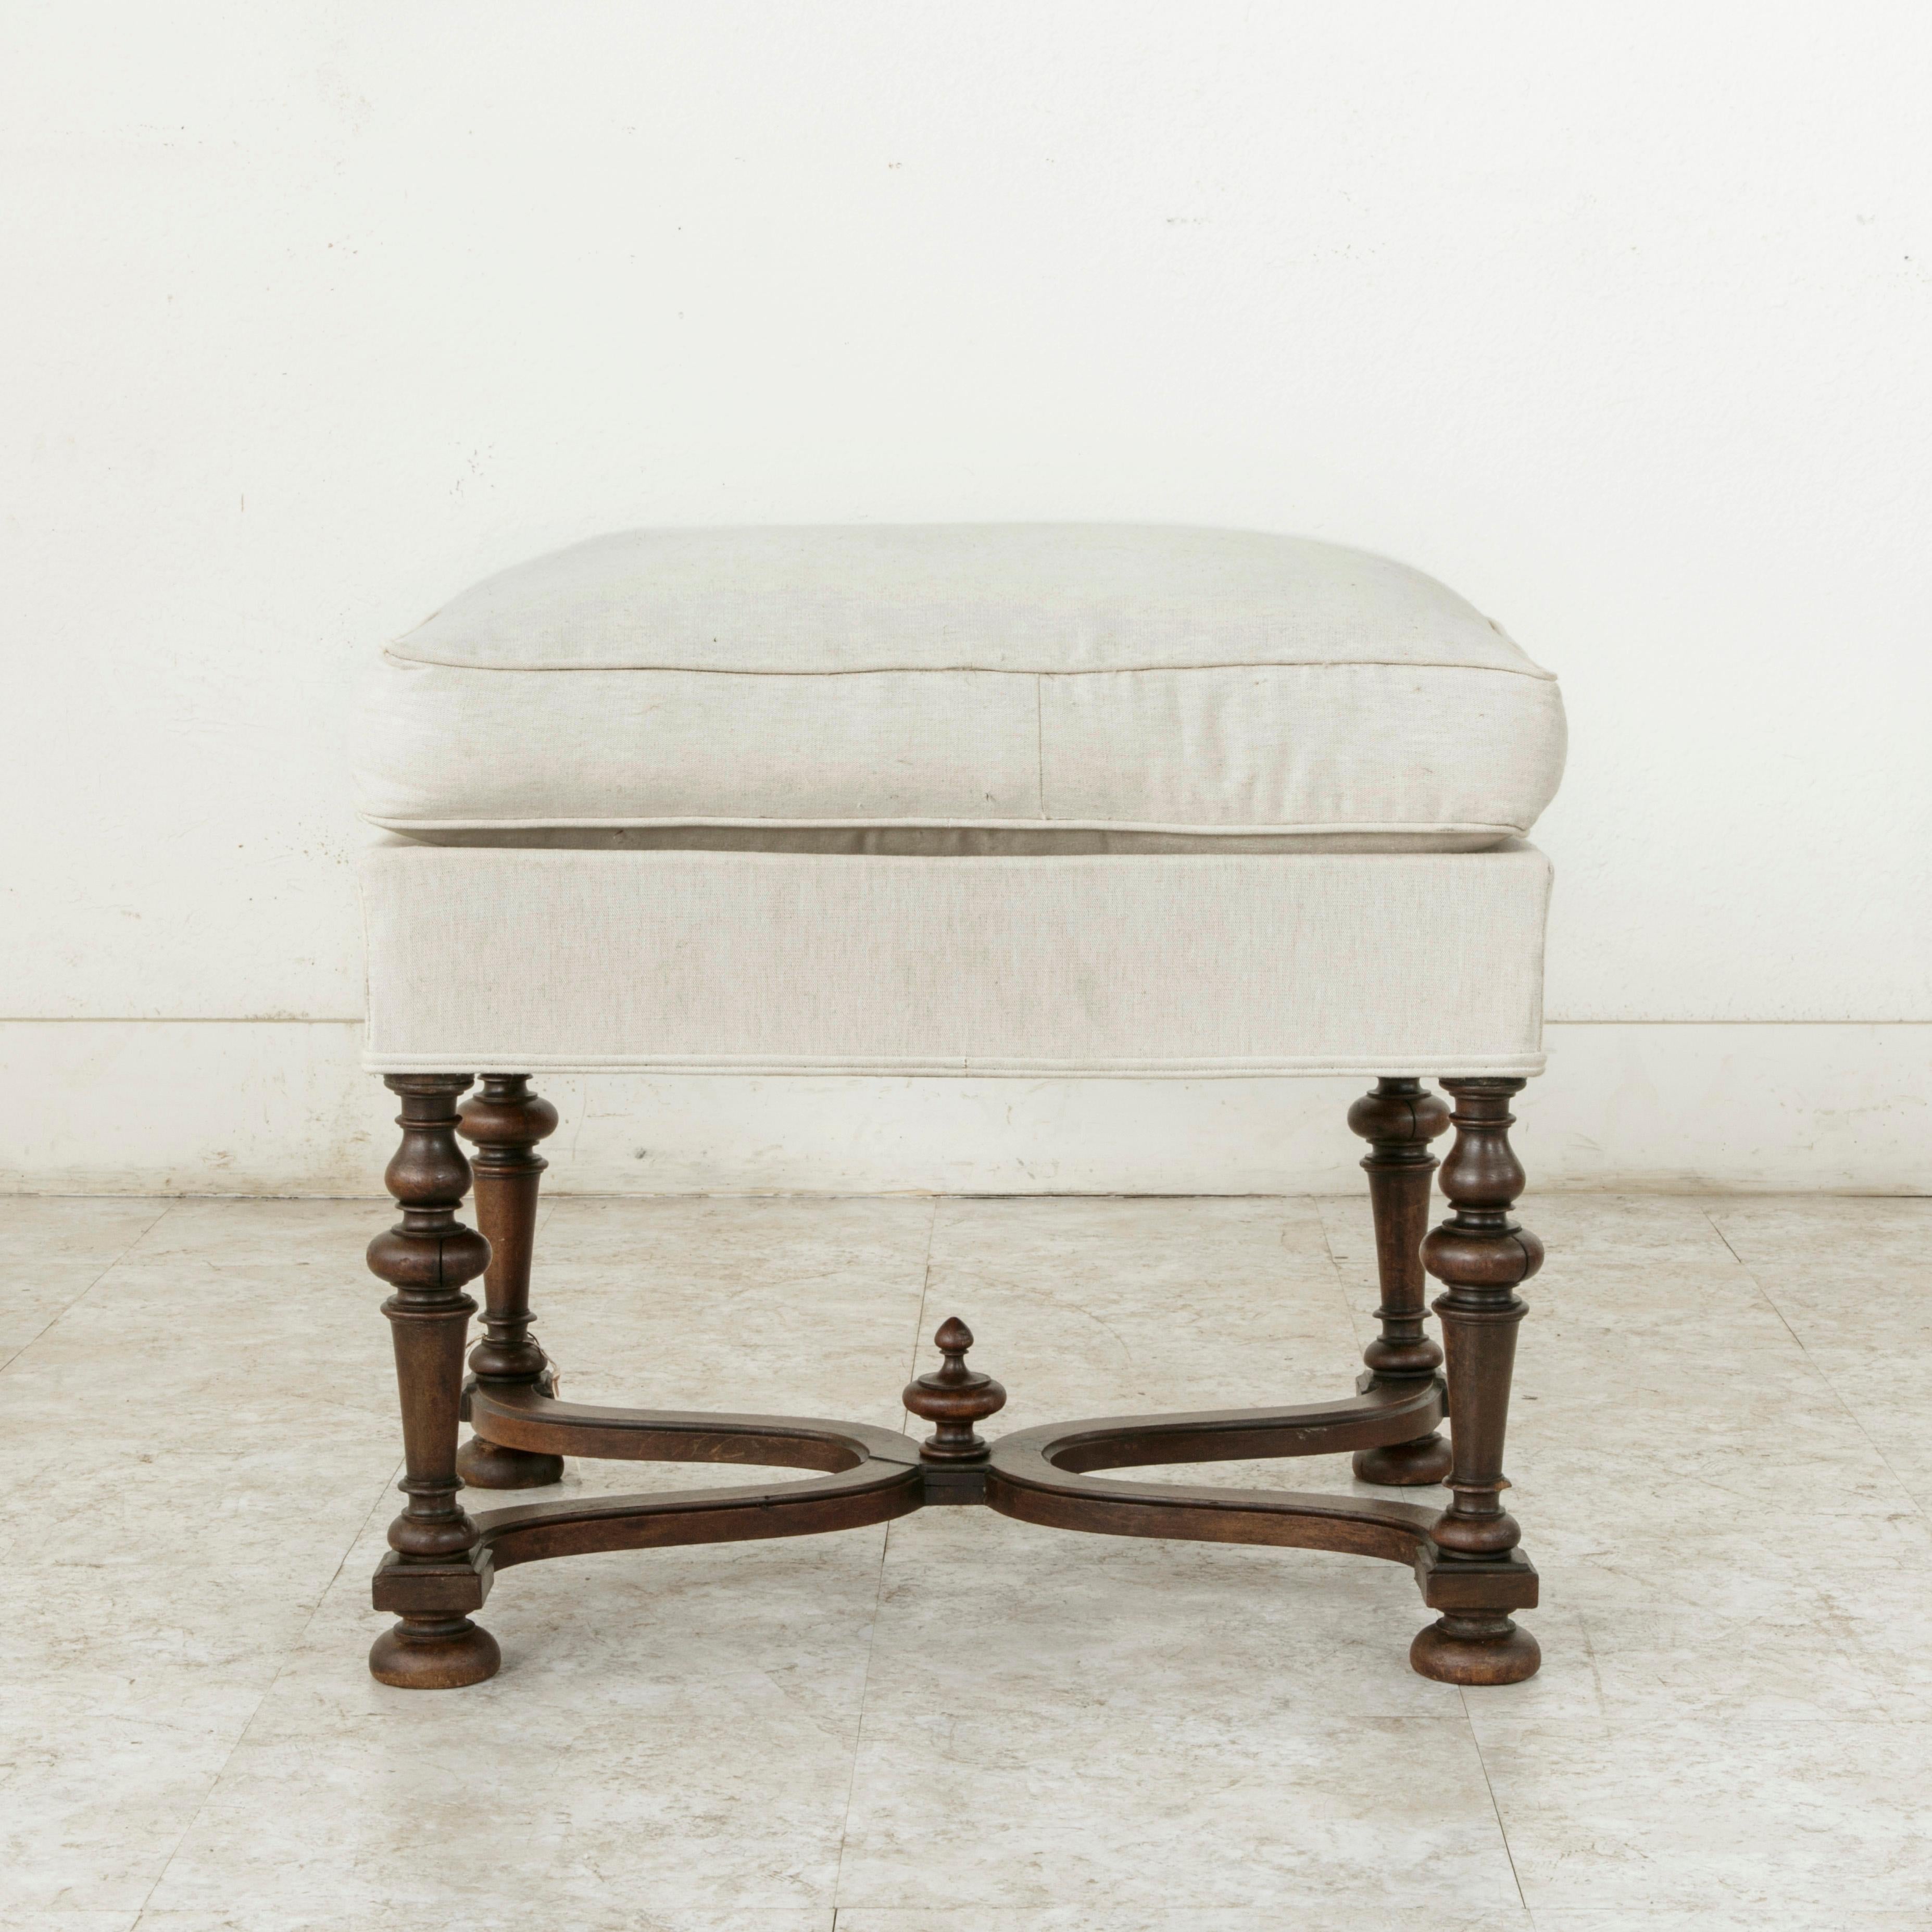 This late 19th French Louis XIII style ottoman is constructed of solid beechwood. Its turned legs are joined by a curved X-stretcher with a central finial. The seat and cushion are upholstered in linen, circa 1890.